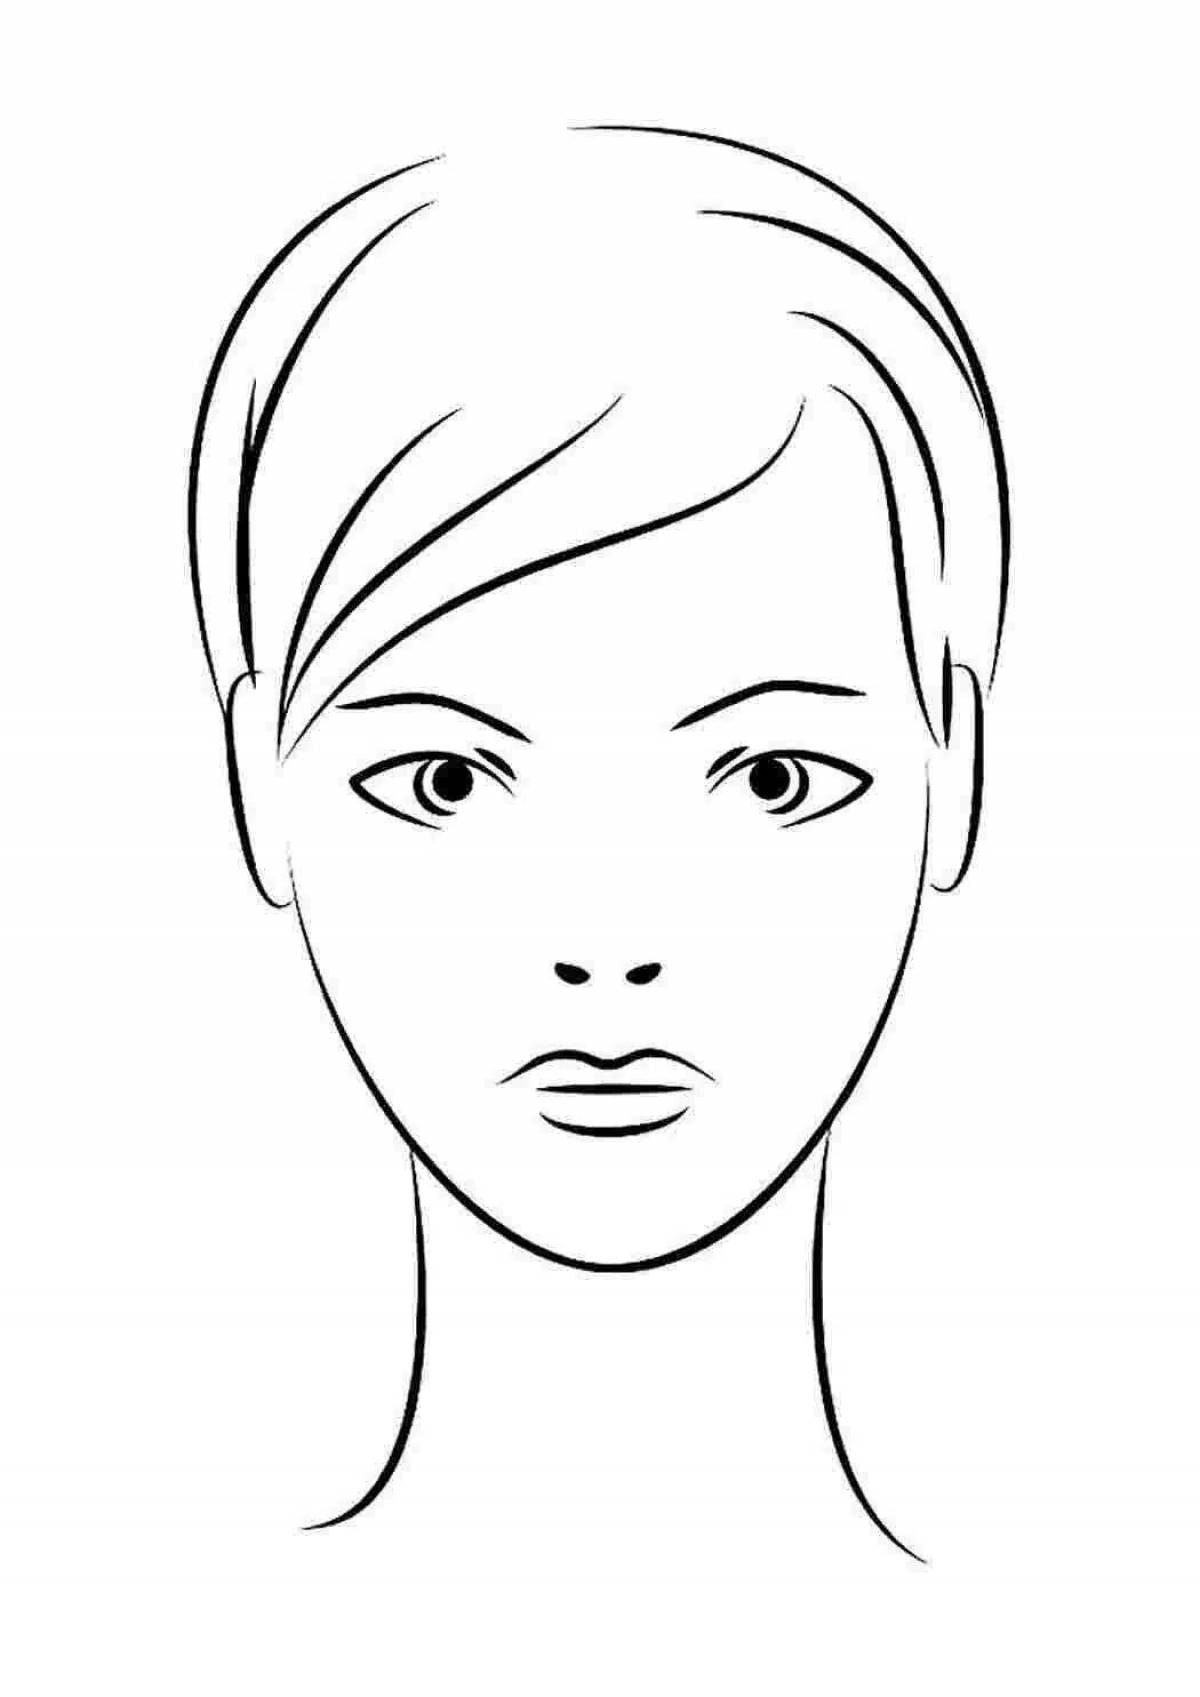 Holiday drawing of a girl's face